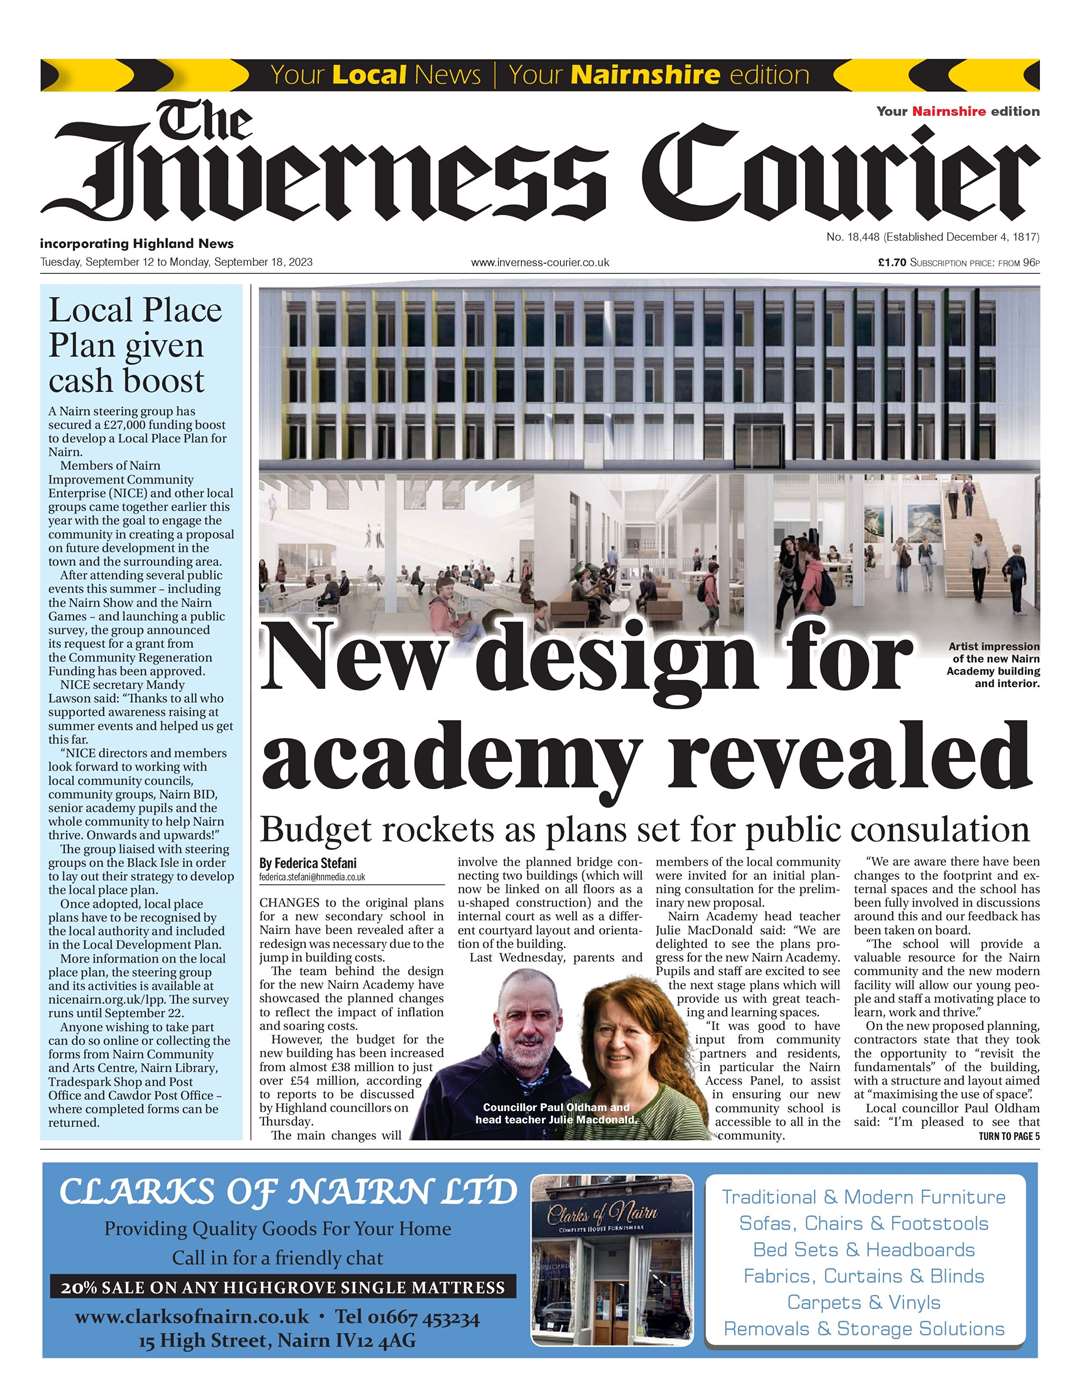 The Inverness Courier (Nairnshire edition), September 12, front page.